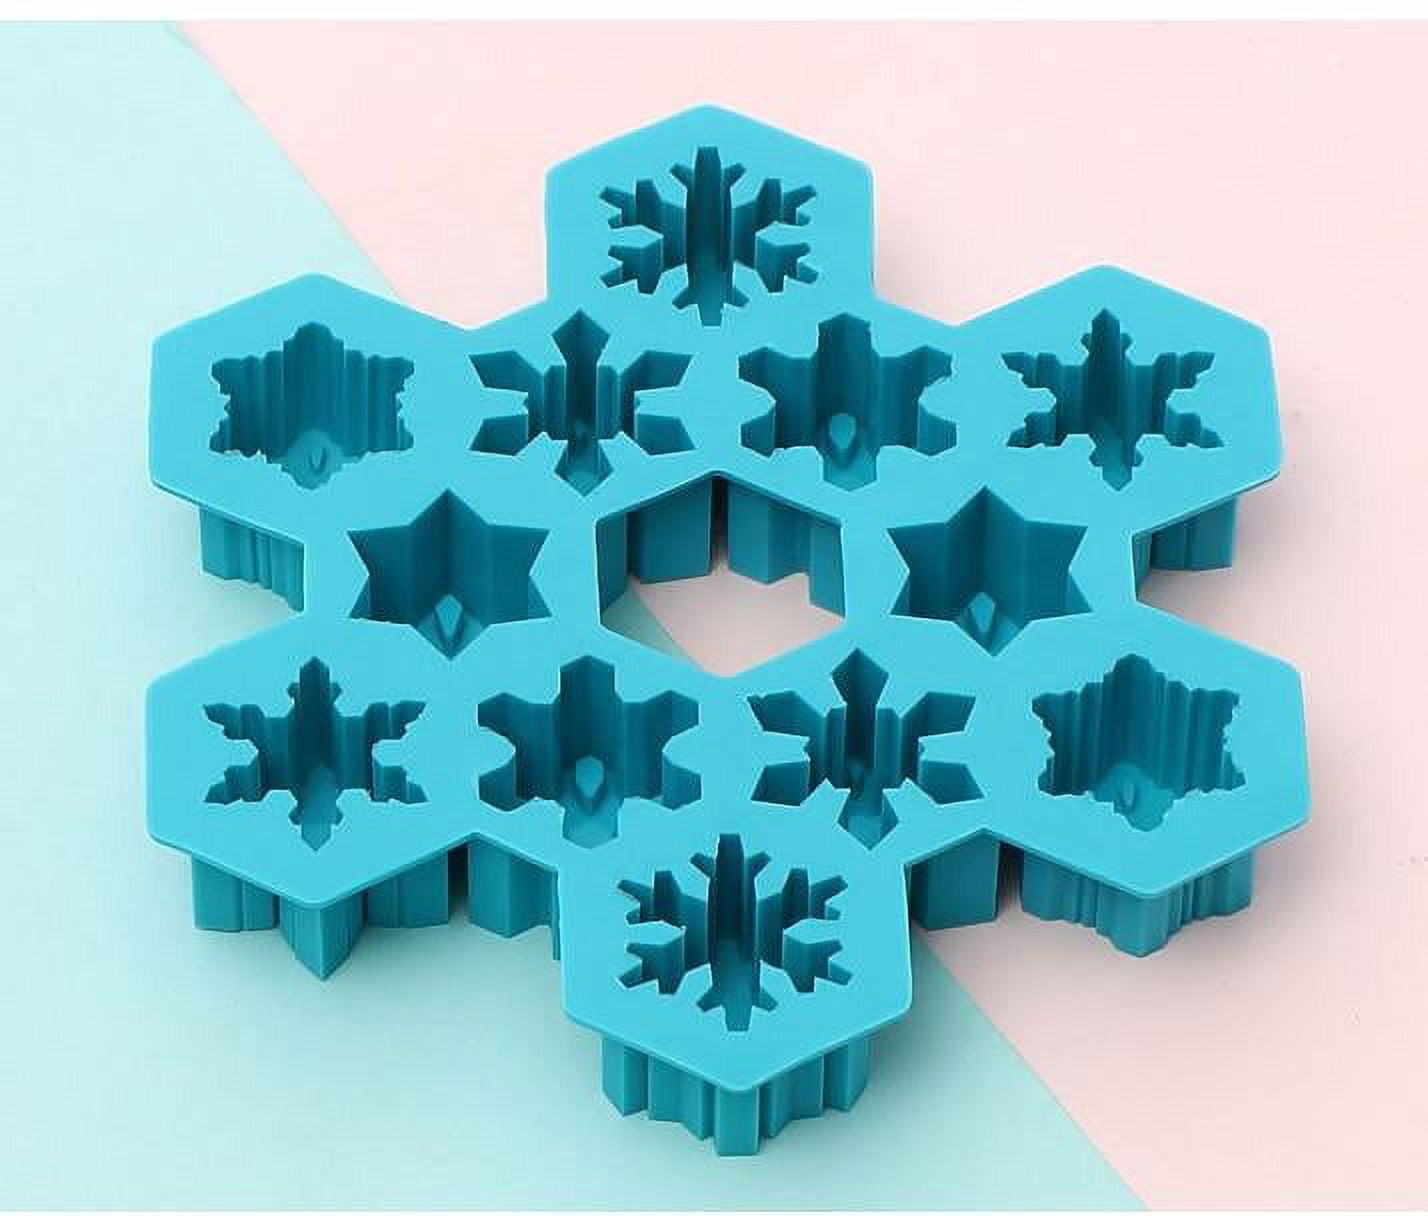  Webake Snowflake Ice Cube Mold Silicone 24-Cavity Christmas Ice  Cube Tray, Snowflake Molds for Chocolate, Soap, Candy, Ice Cube for  Whiskey, Spirits, Liquor, Cocktails, Soda & More: Home & Kitchen